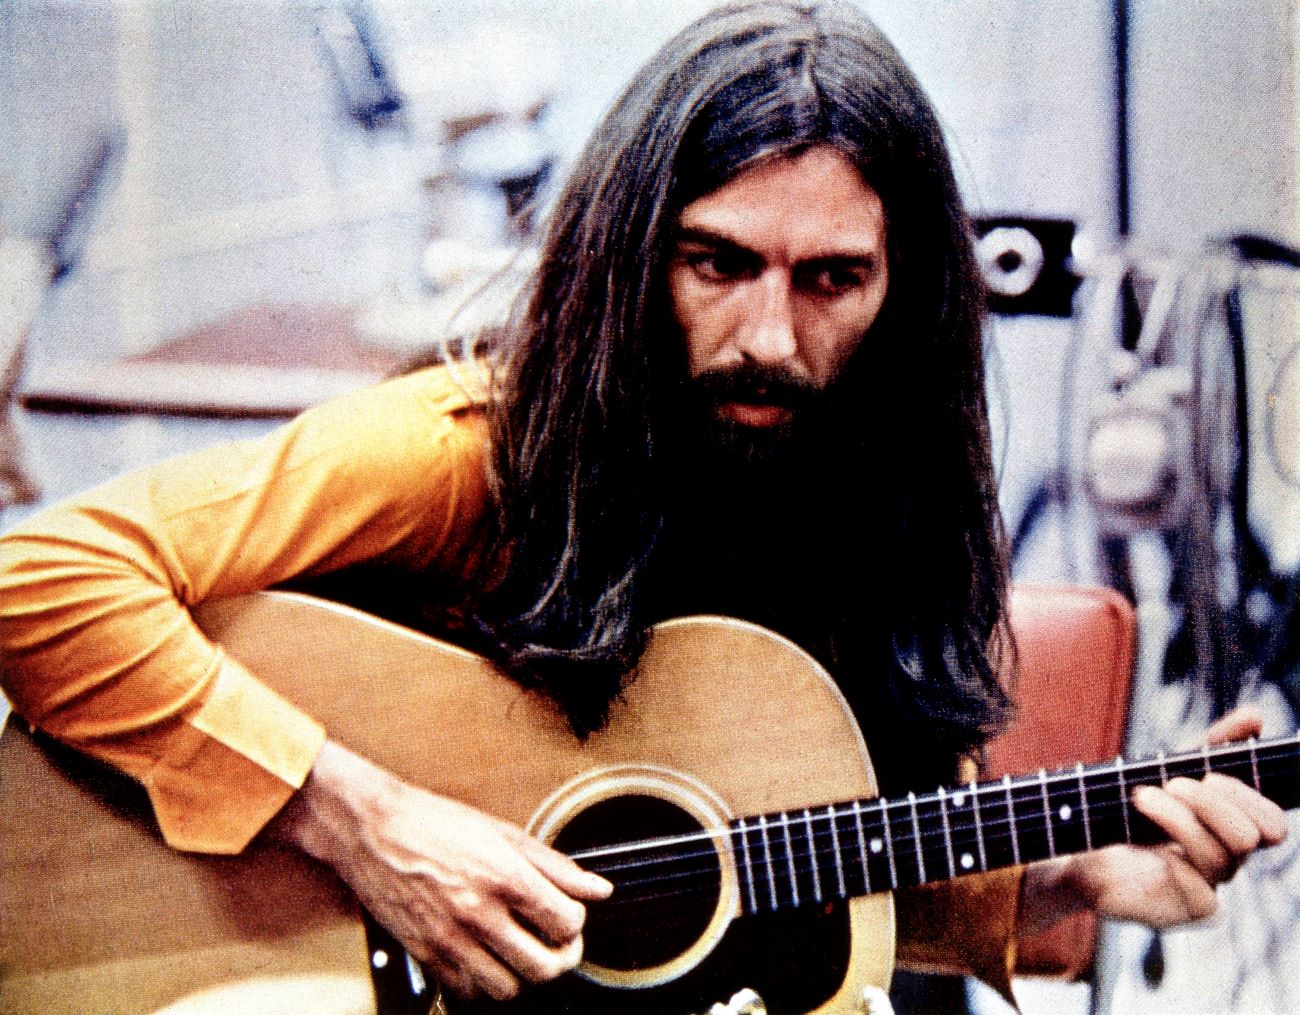 George Harrison sits in a chair and strums the guitar.